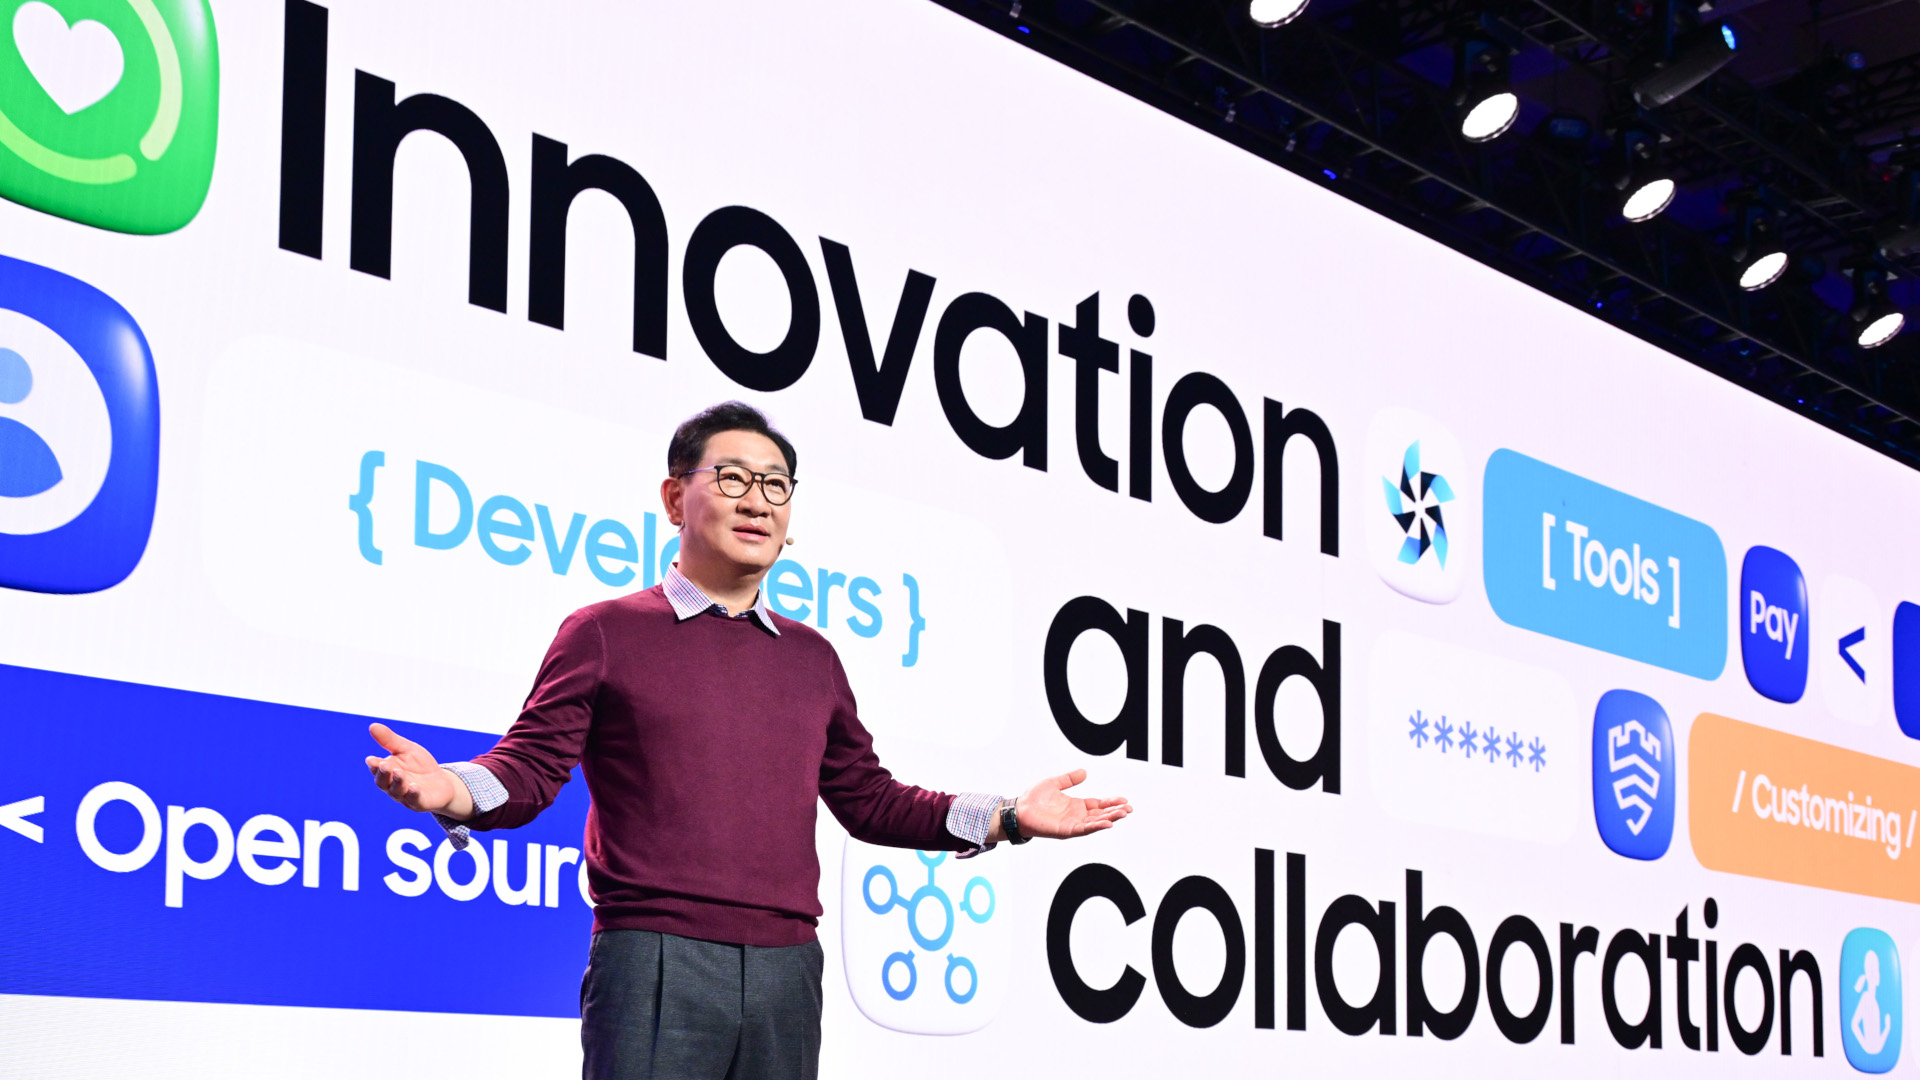 The power of open platforms - Tizen OS (Image: Samsung)